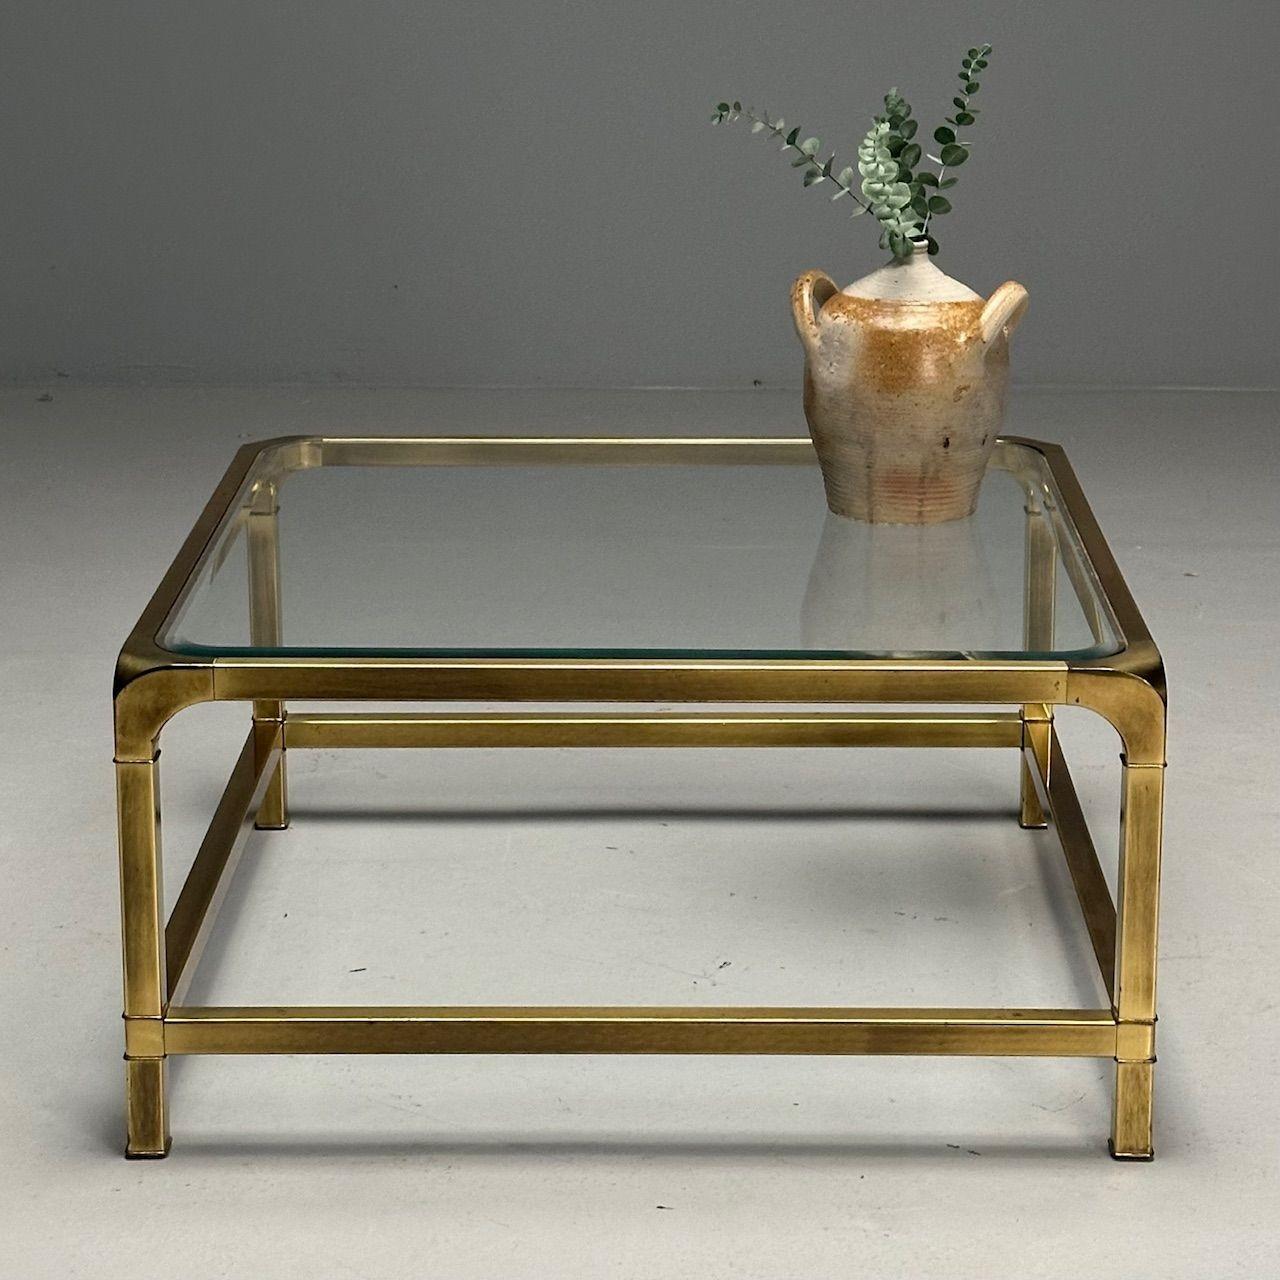 Mastercraft, Mid-Century Modern, Square Coffee Table, Brass, Glass, USA, 1970s

Square coffee table designed by Mastercraft Furniture and produced in the United States circa 1970s. This example features a patinated brass frame with rounded edges,